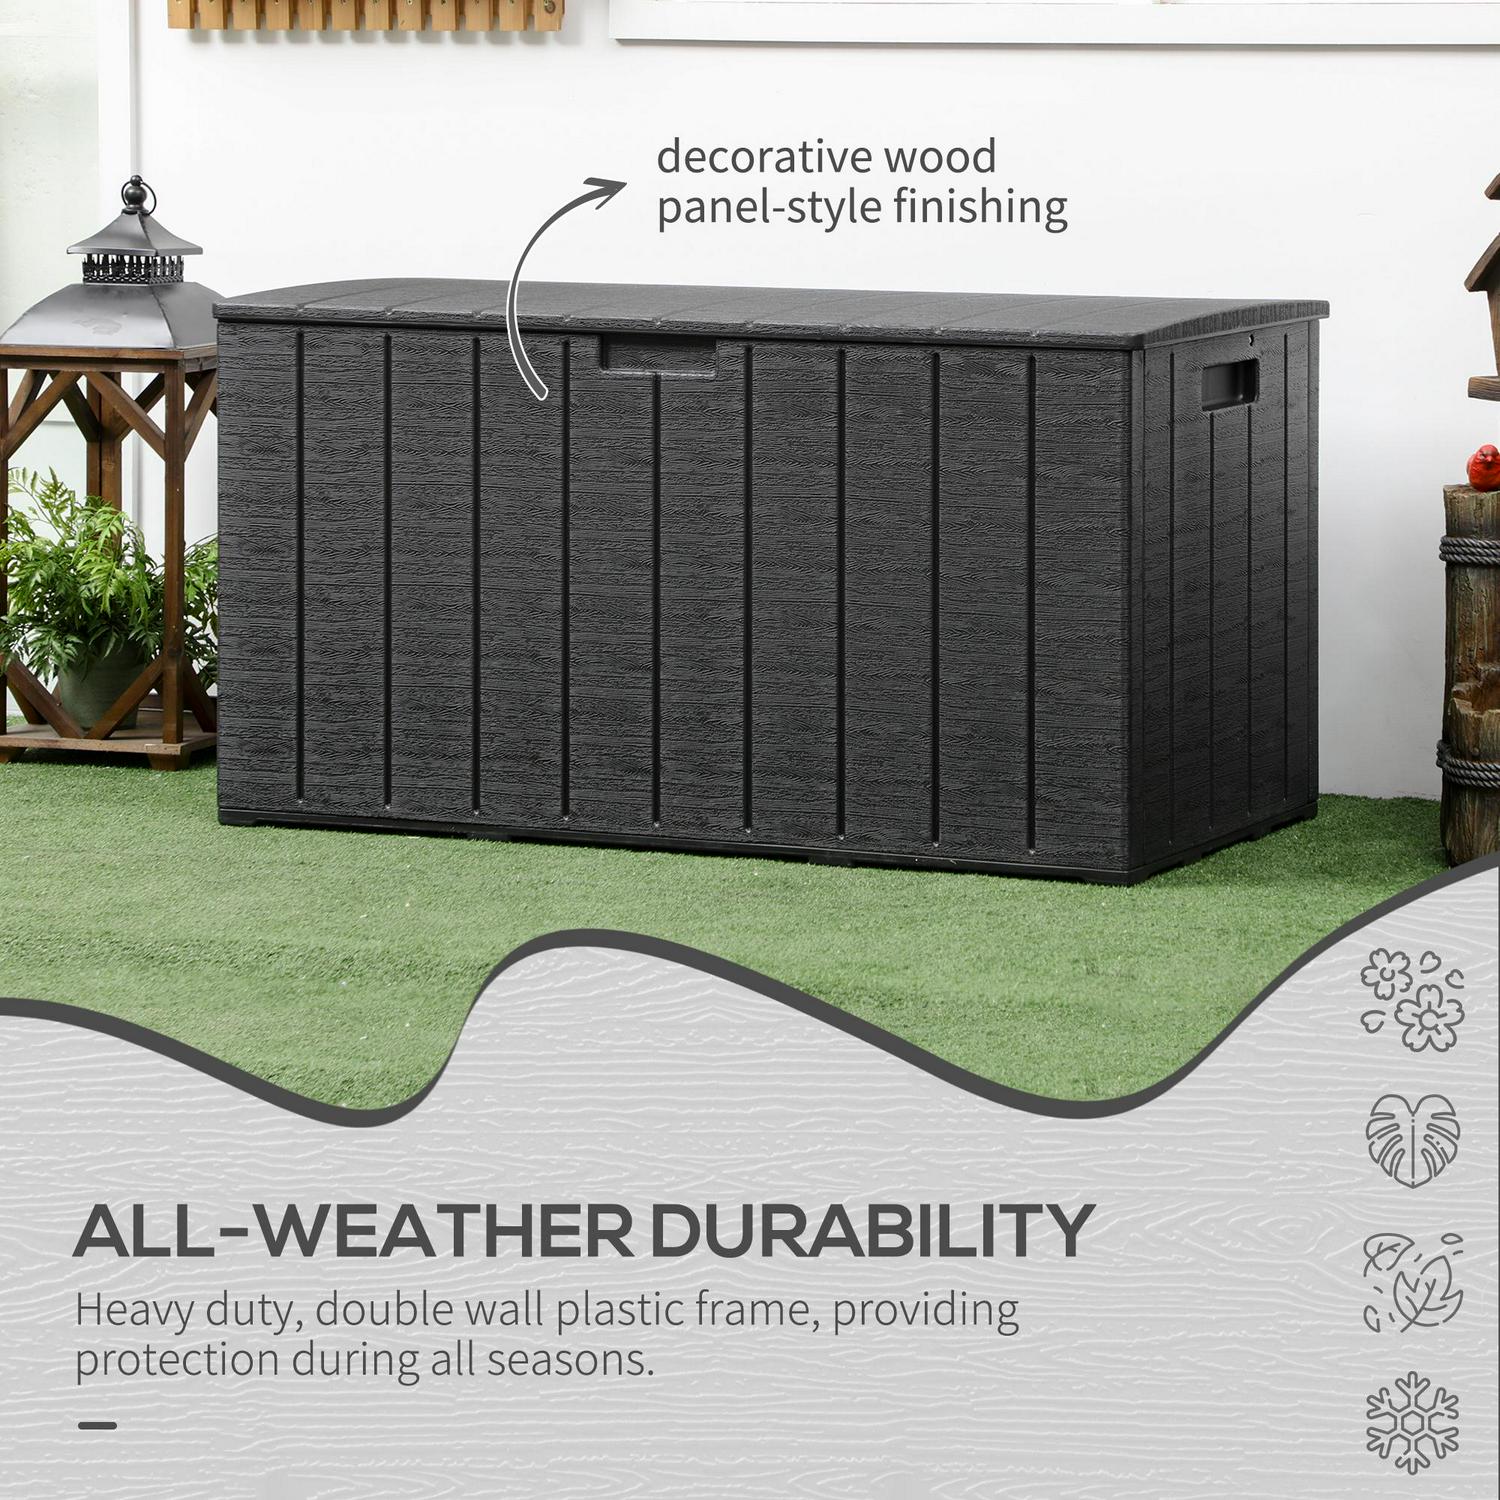 336 Litre Extra Large Outdoor Garden Storage Box, Water-resistant Heavy Duty Double Wall Plastic Container, Furniture Organizer, Black